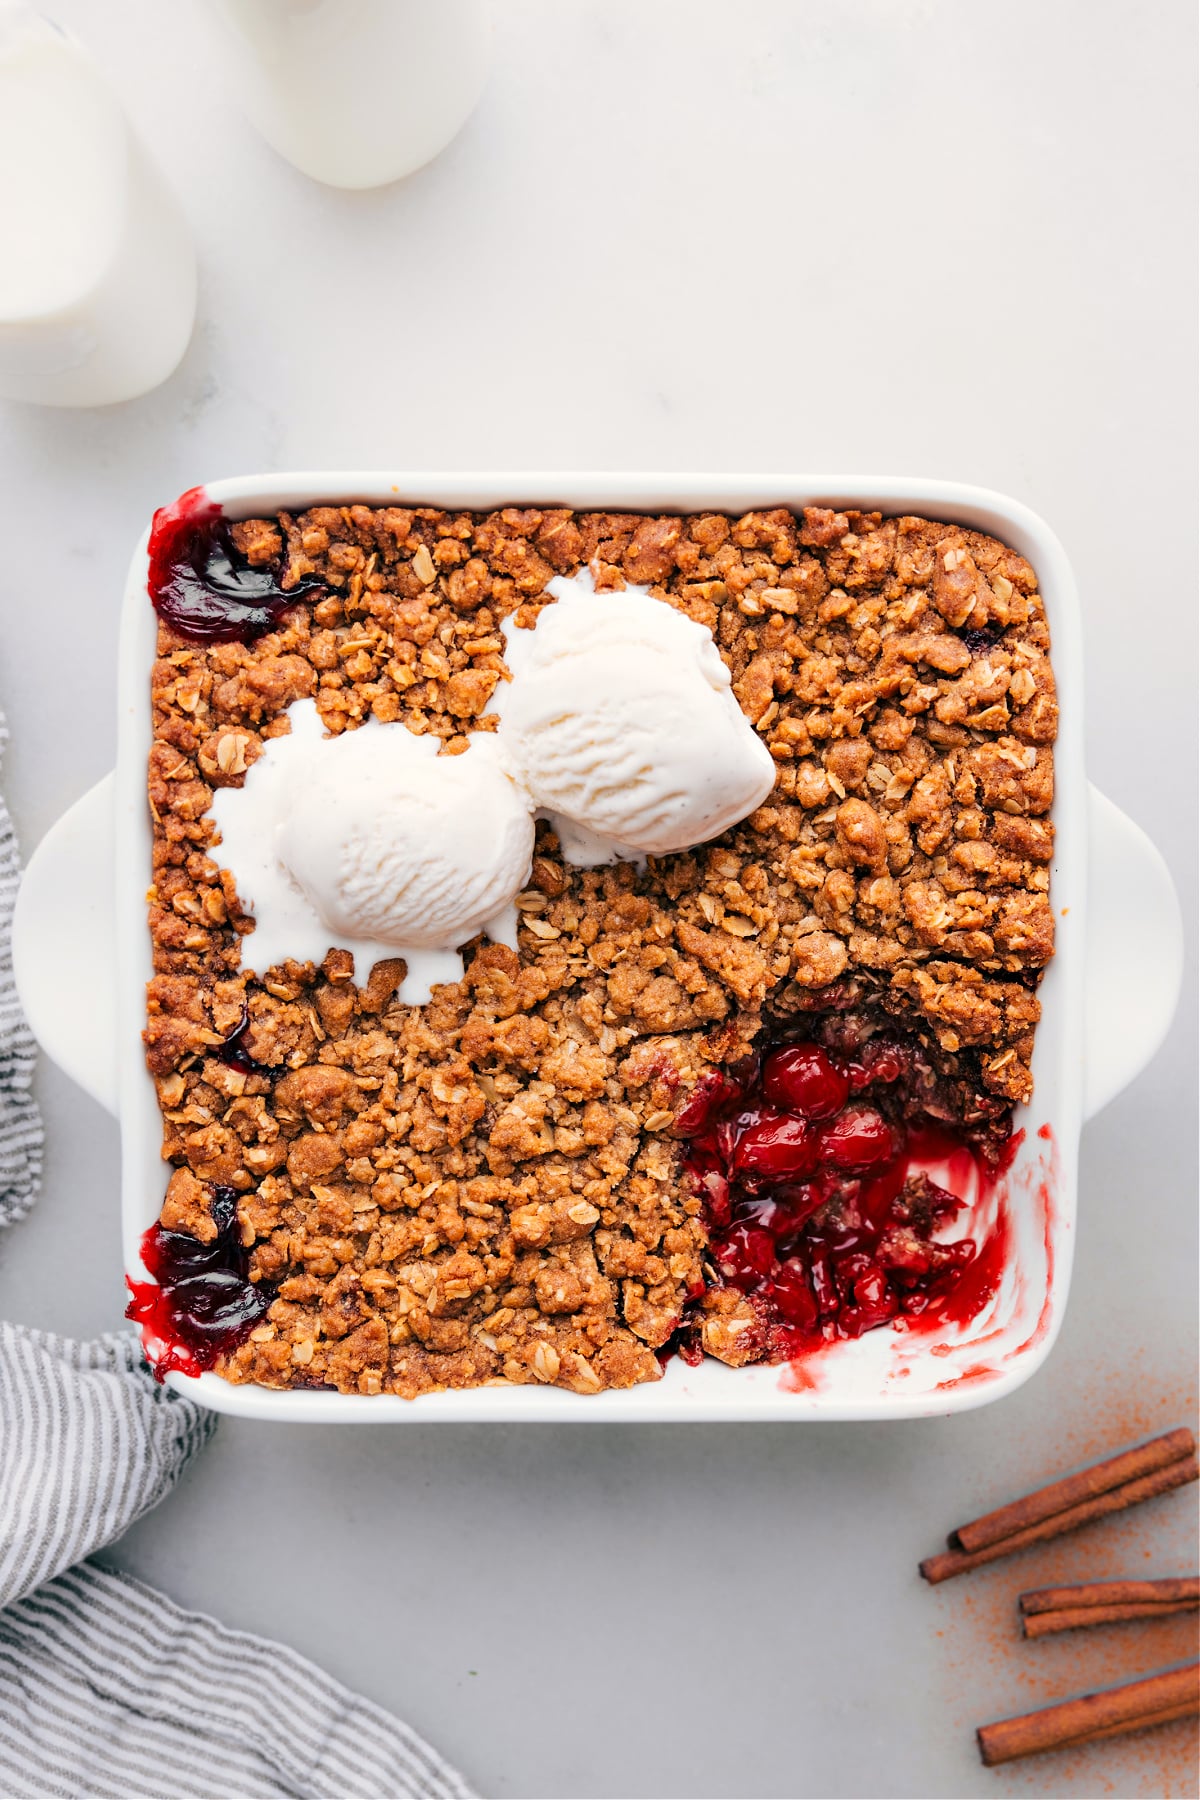 Cherry crisp in a pan with a scoop removed, revealing its delectable contents.